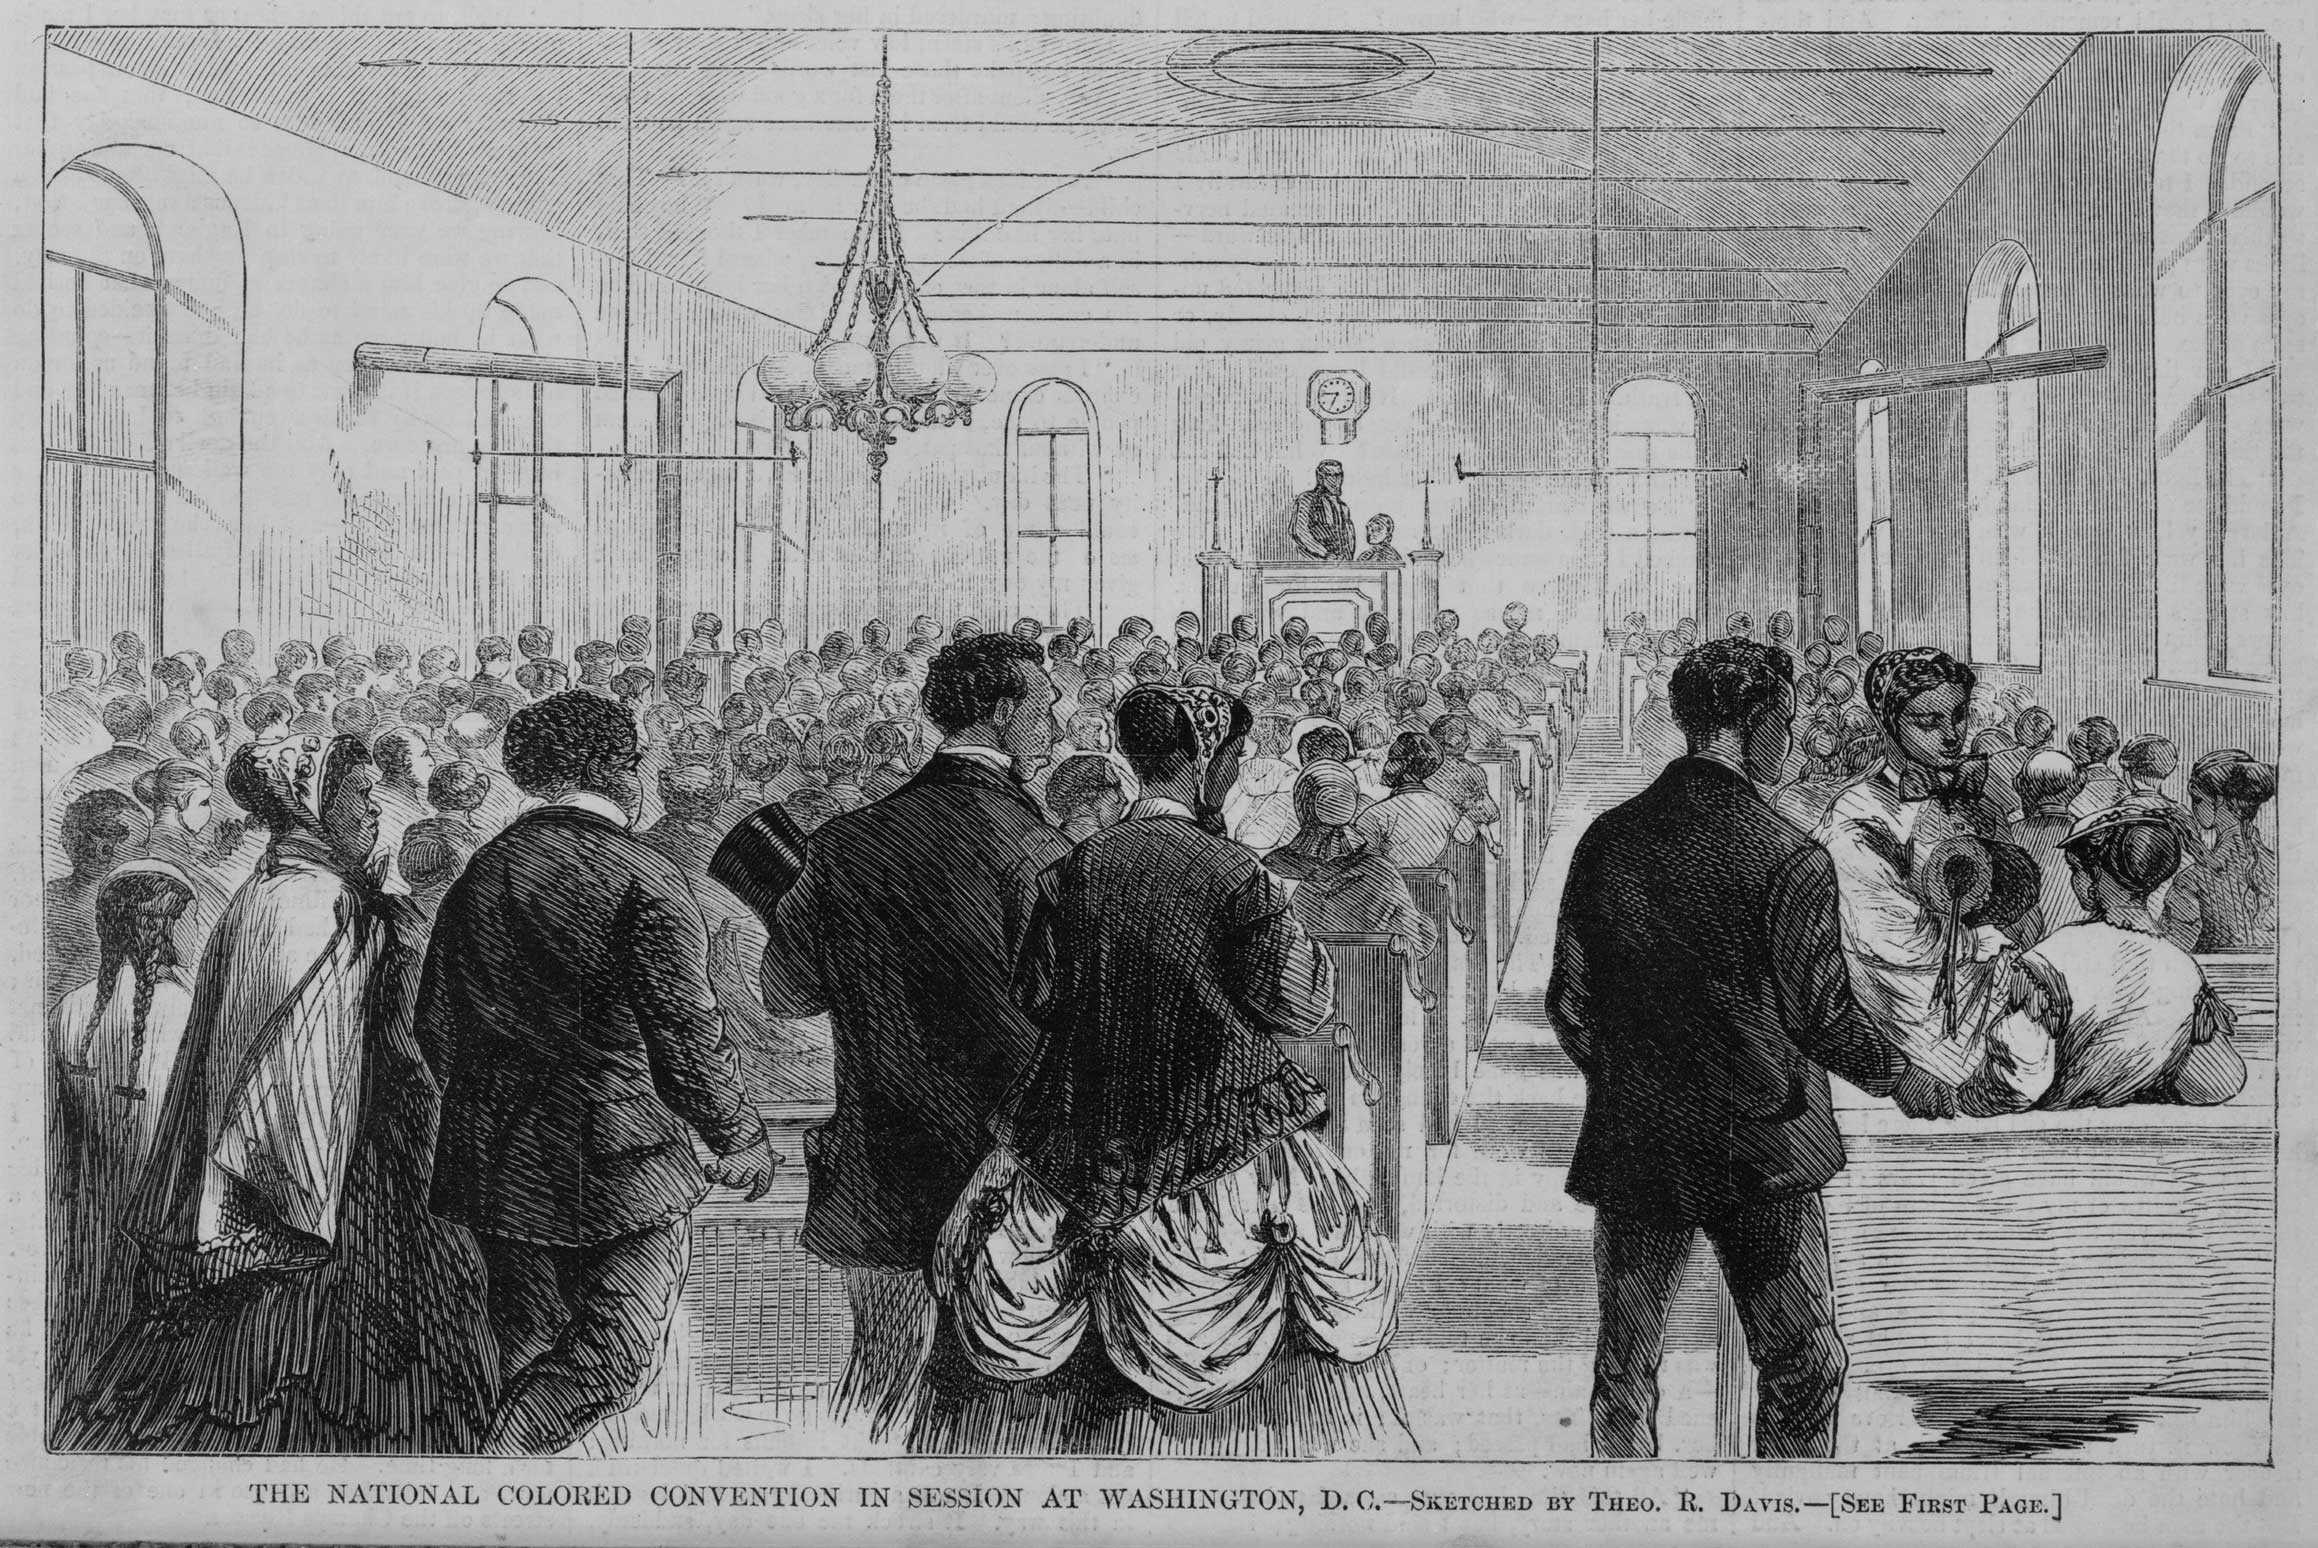 A sketched of a hall with filled African American people gathered and sitting in pews.